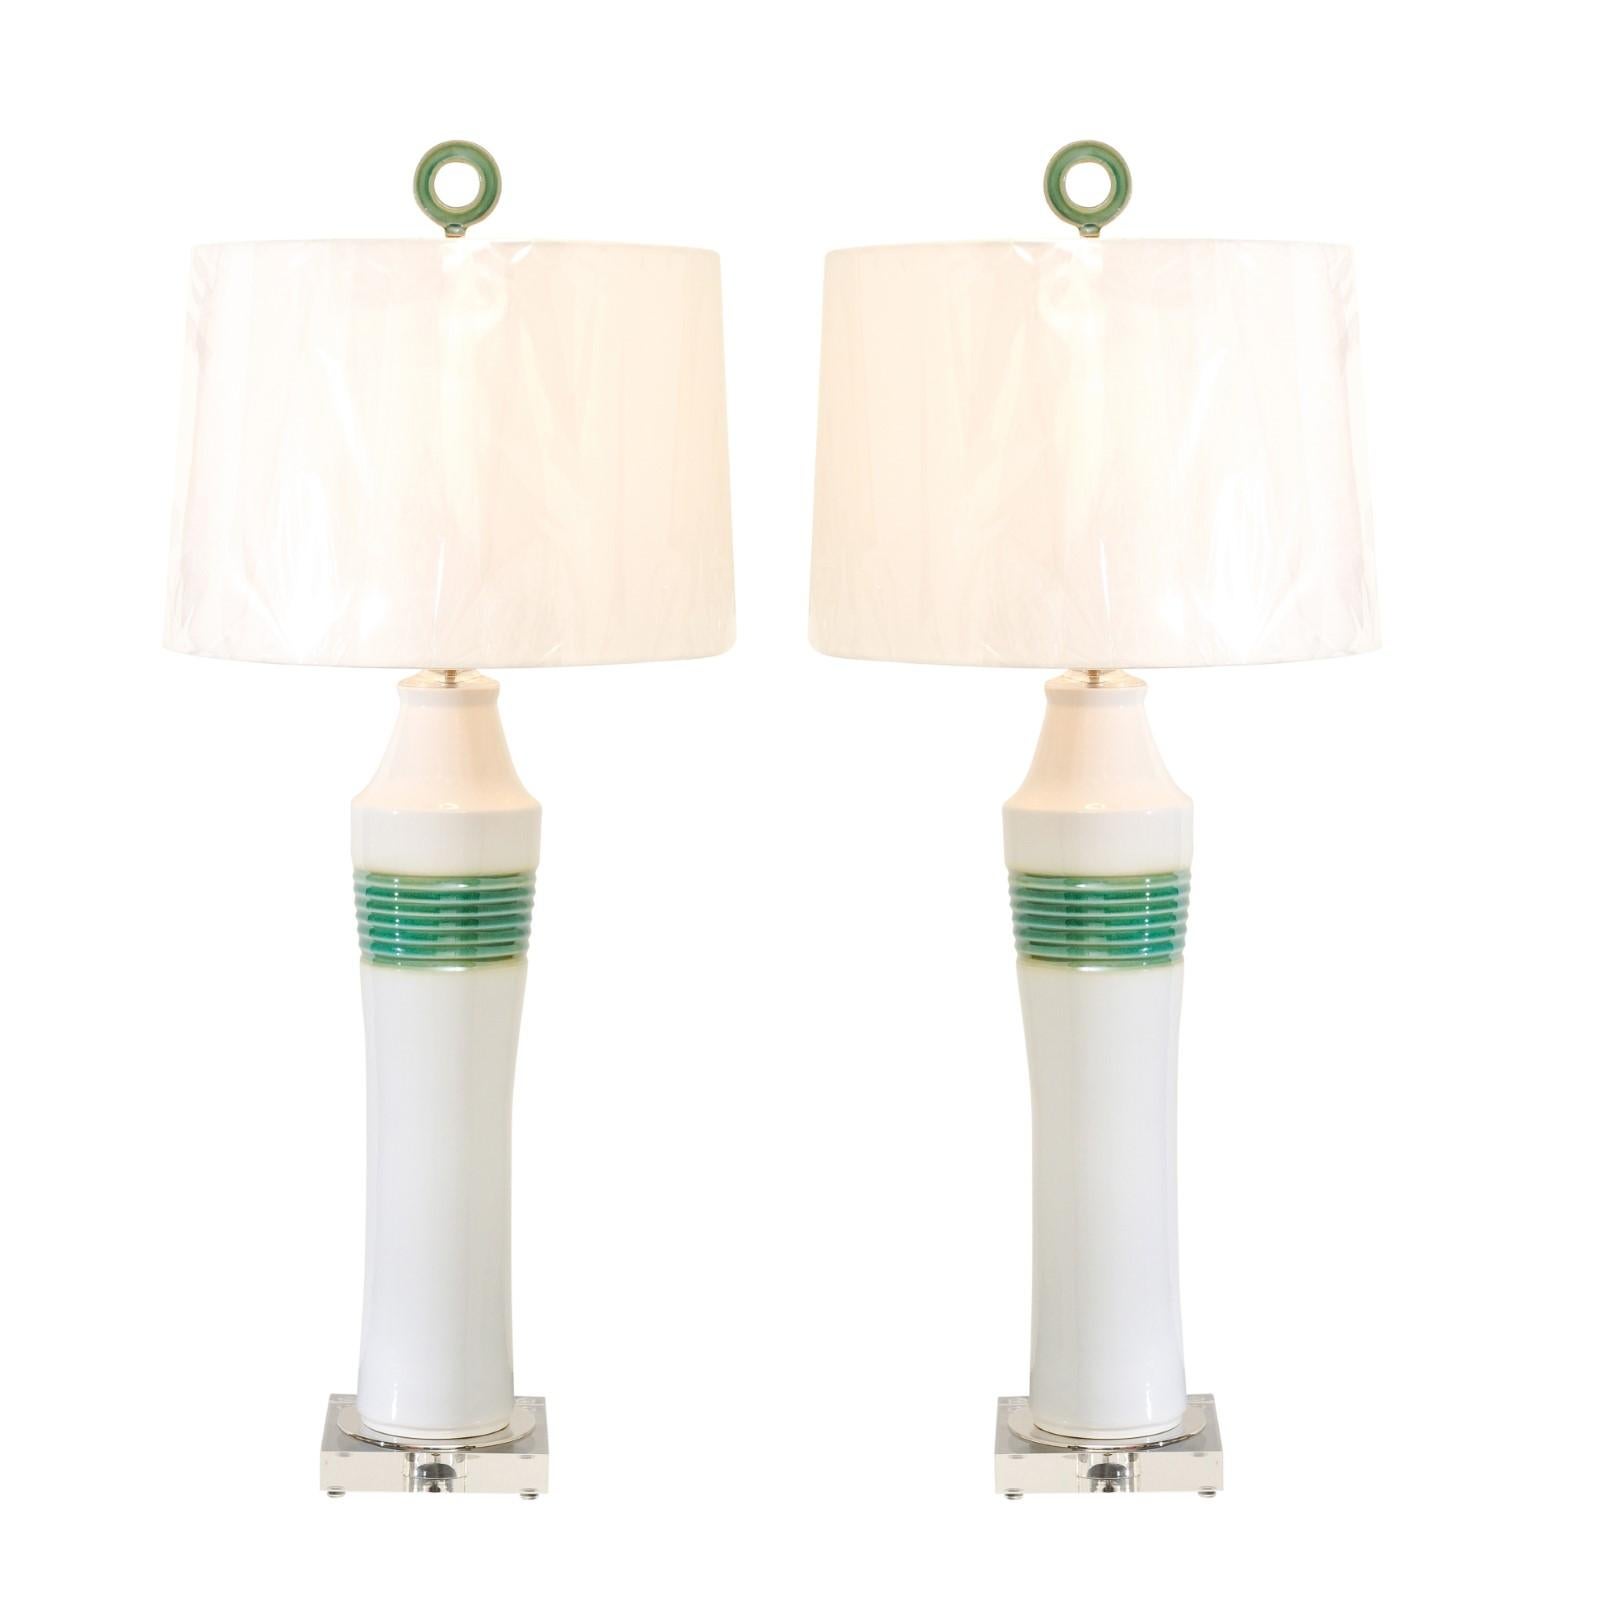 Installation Ready: Pair of Aquamarine and Cream Glazed Vessels as Custom Lamps